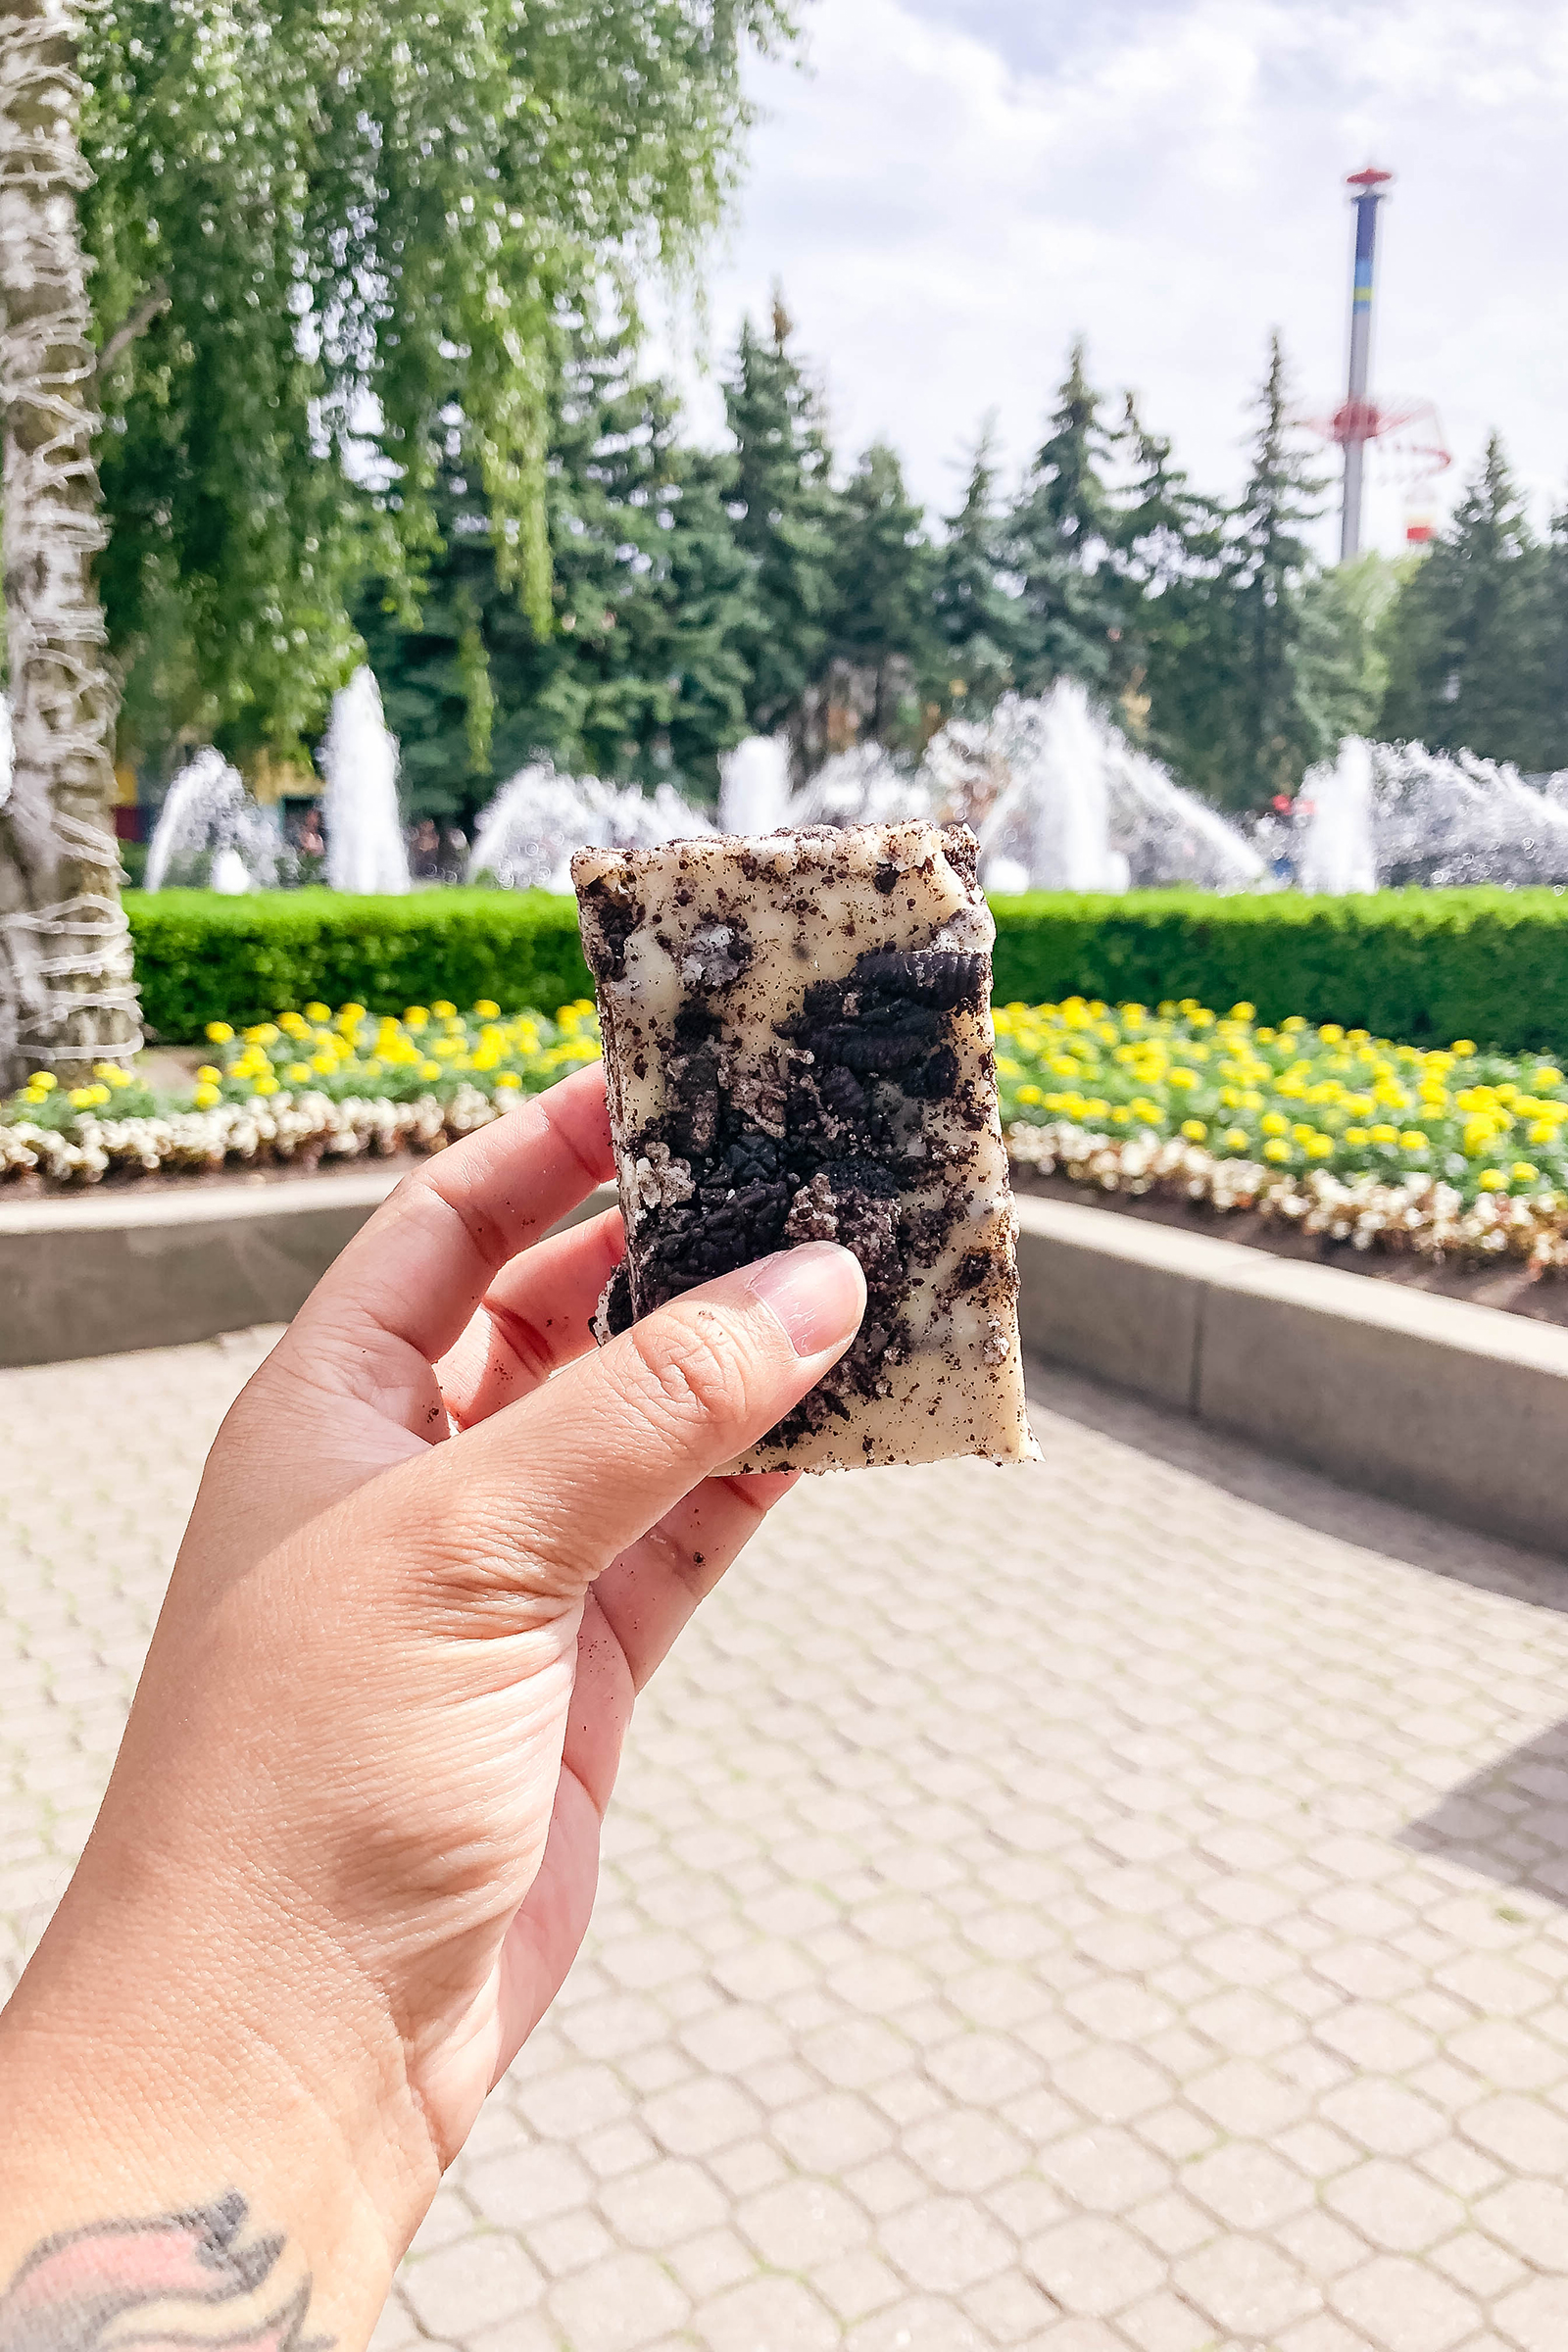 Canada's Wonderland Snacks that are worthy for your foodie taste buds (trust me, you'll want to bring your appetite!